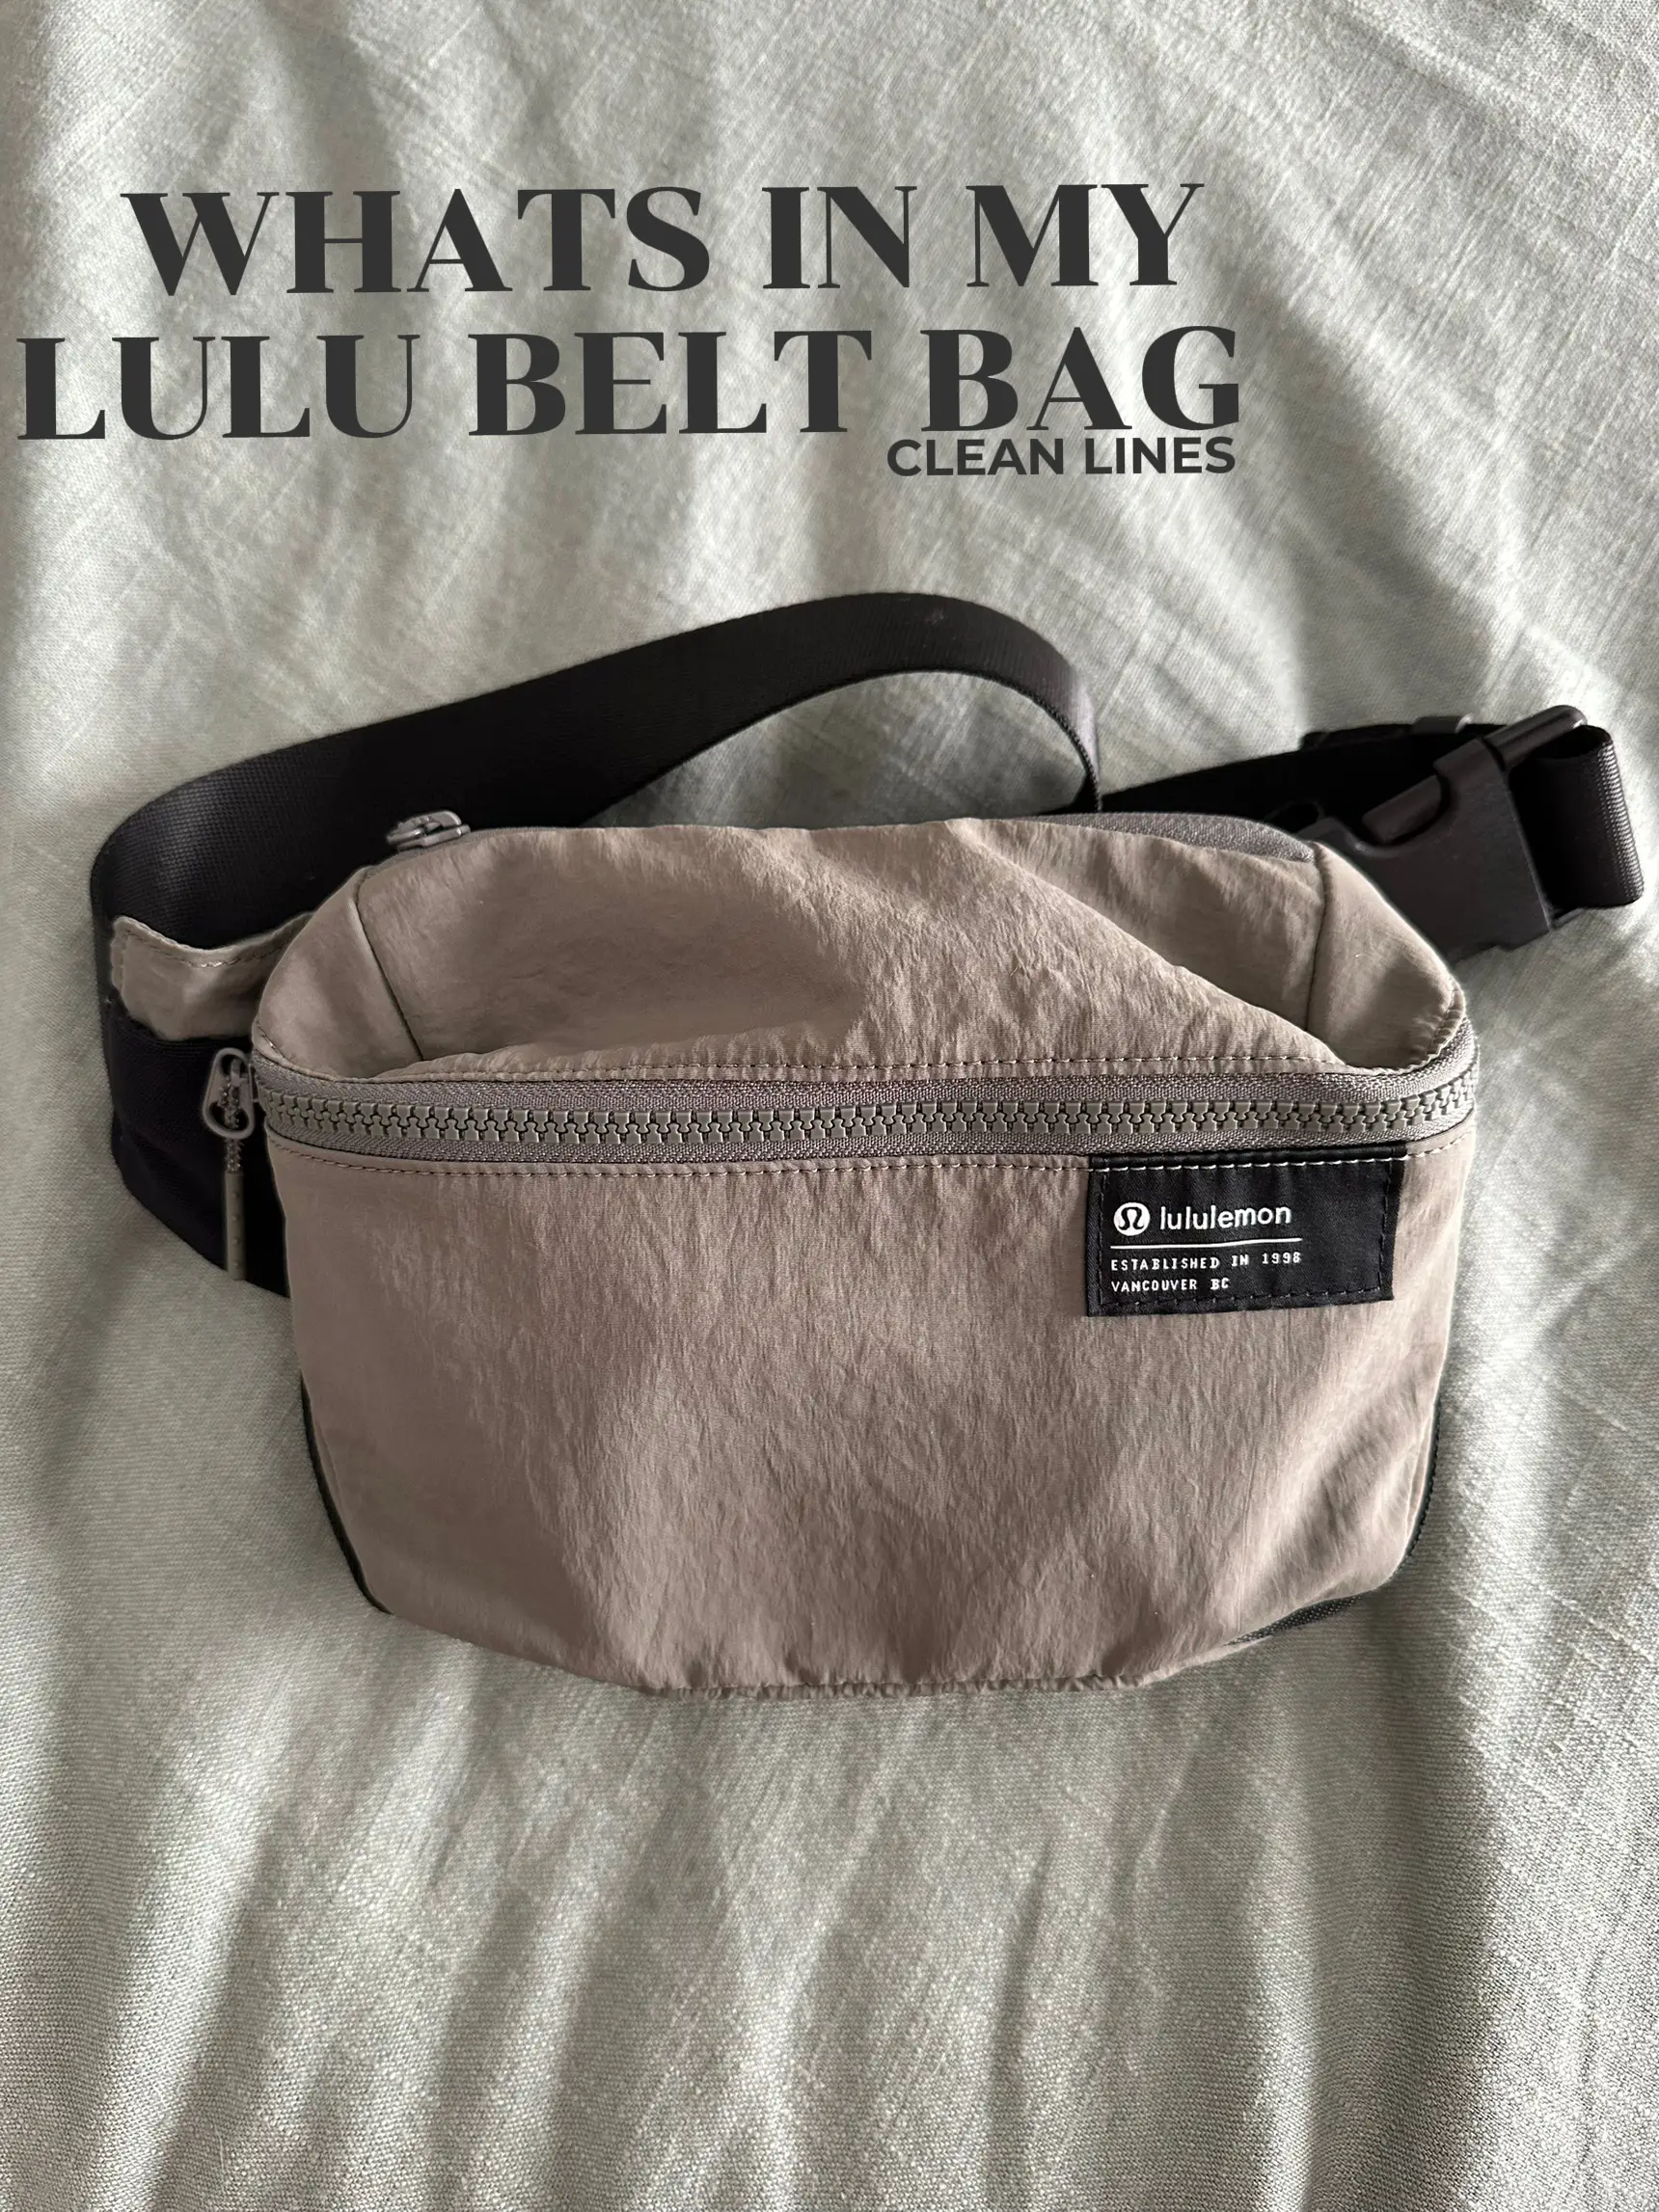 WHATS IN MY LULU BELT BAG, Gallery posted by Cynthia Soto